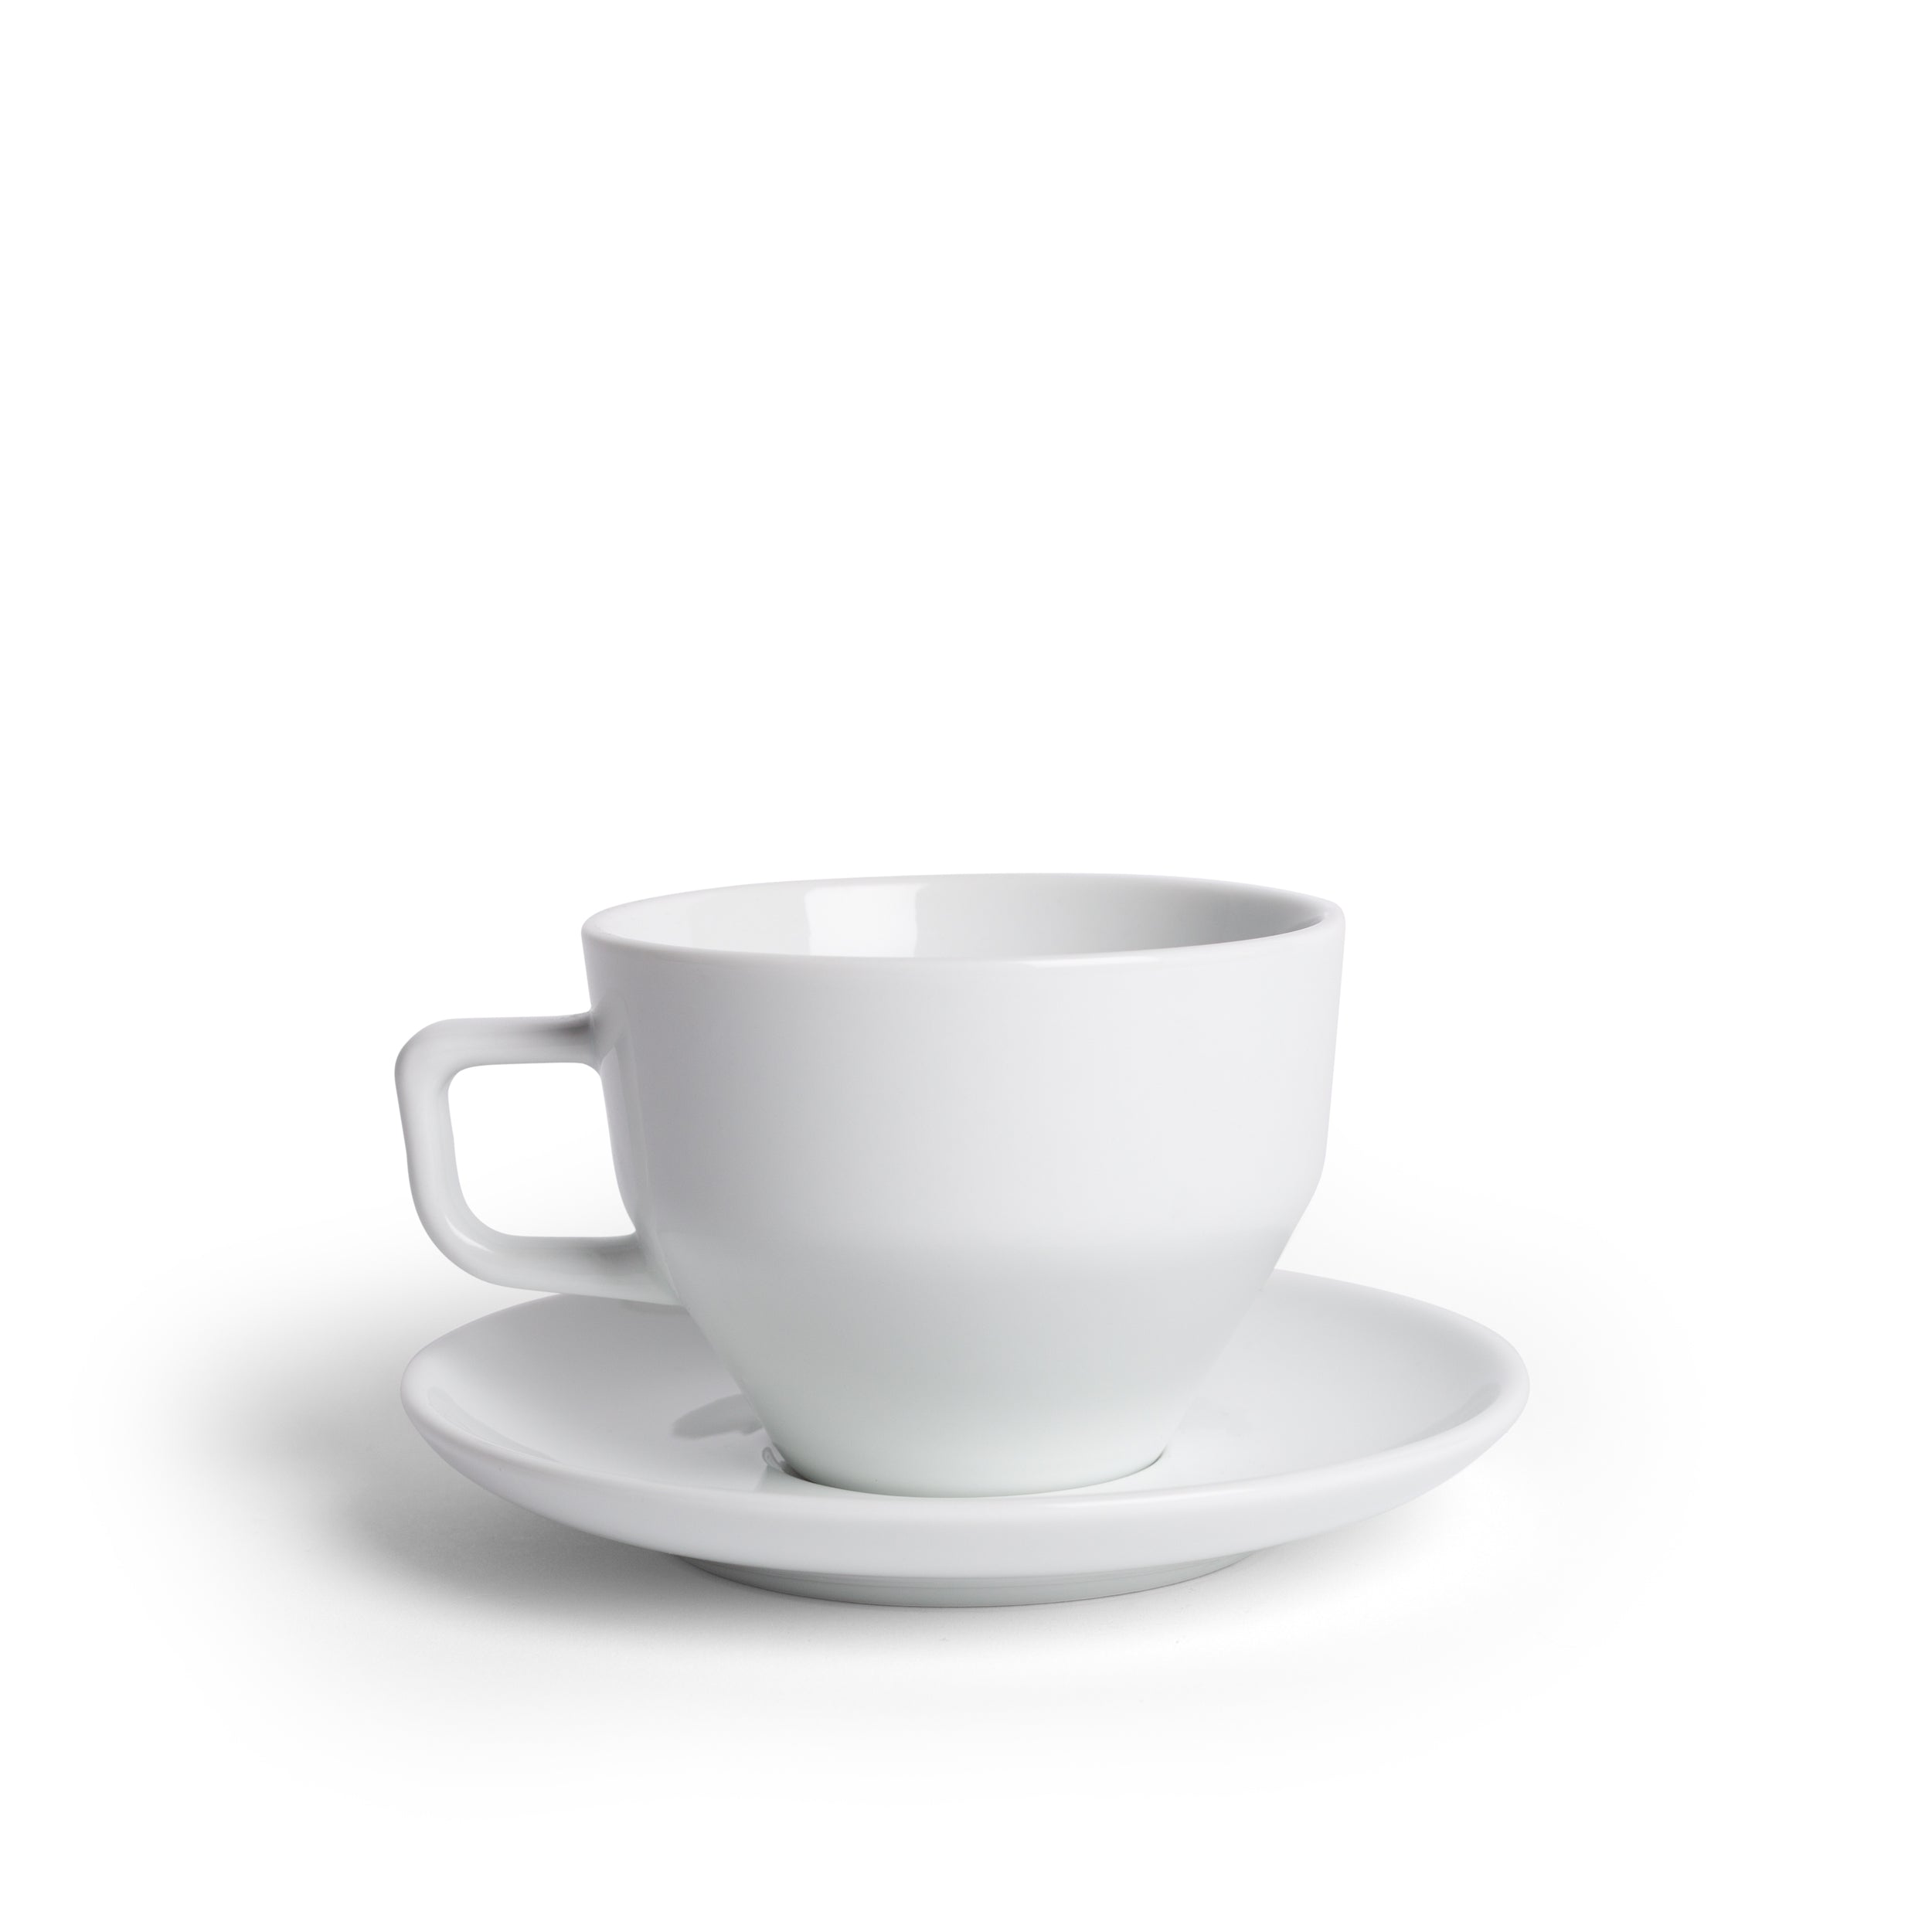 ACME x COFFEE COLLECTIVE Coffee Cups and Saucer Set